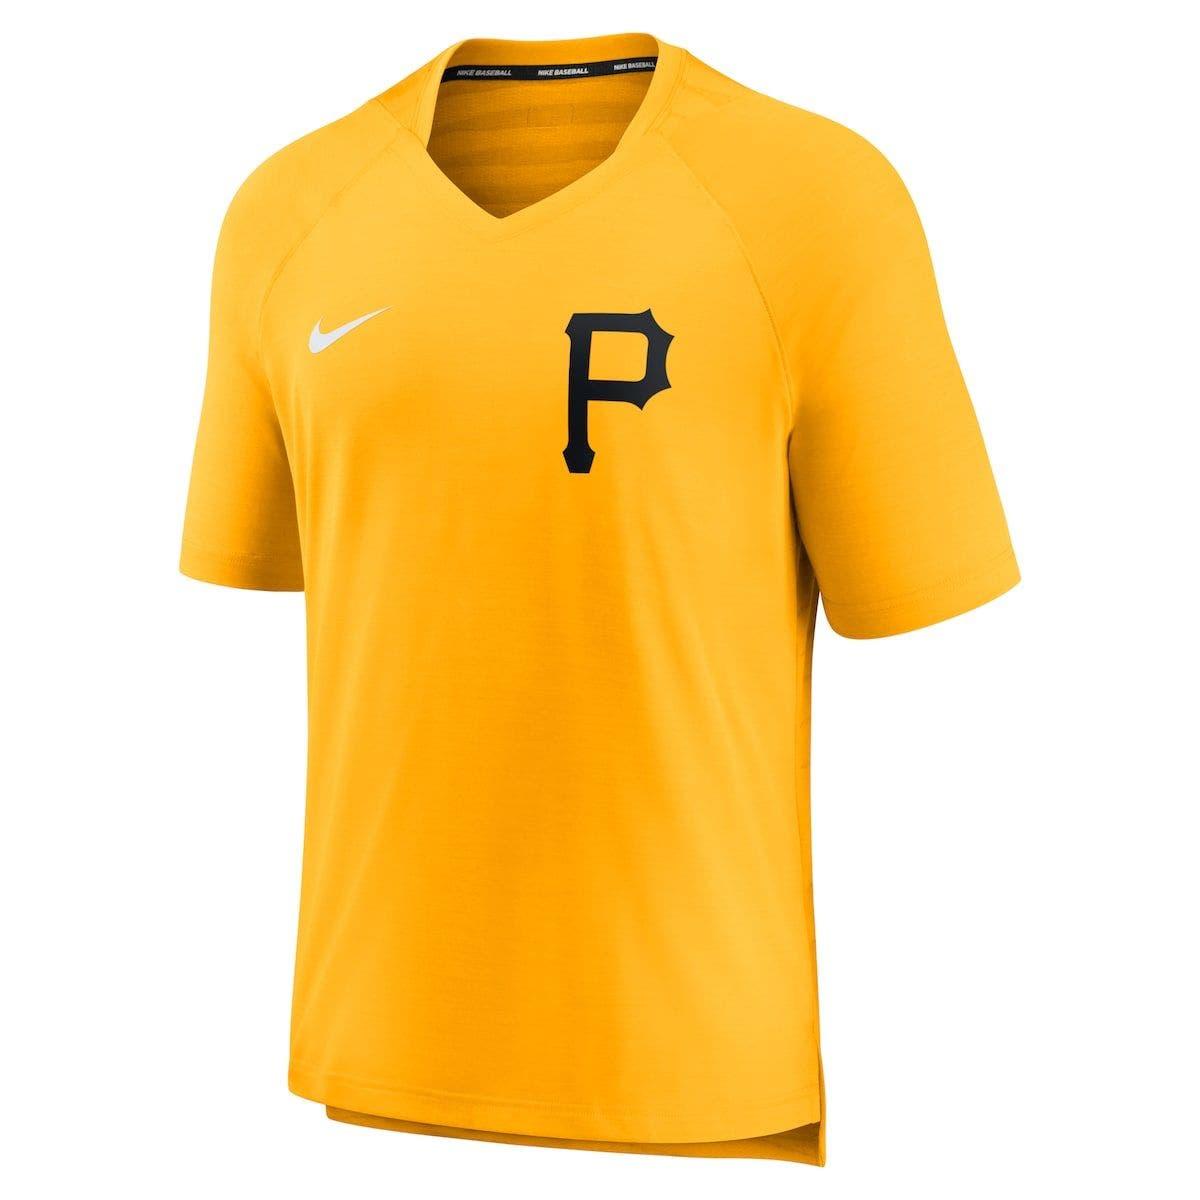 Nike Pittsburgh Pirates Authentic Collection Pregame Performance V